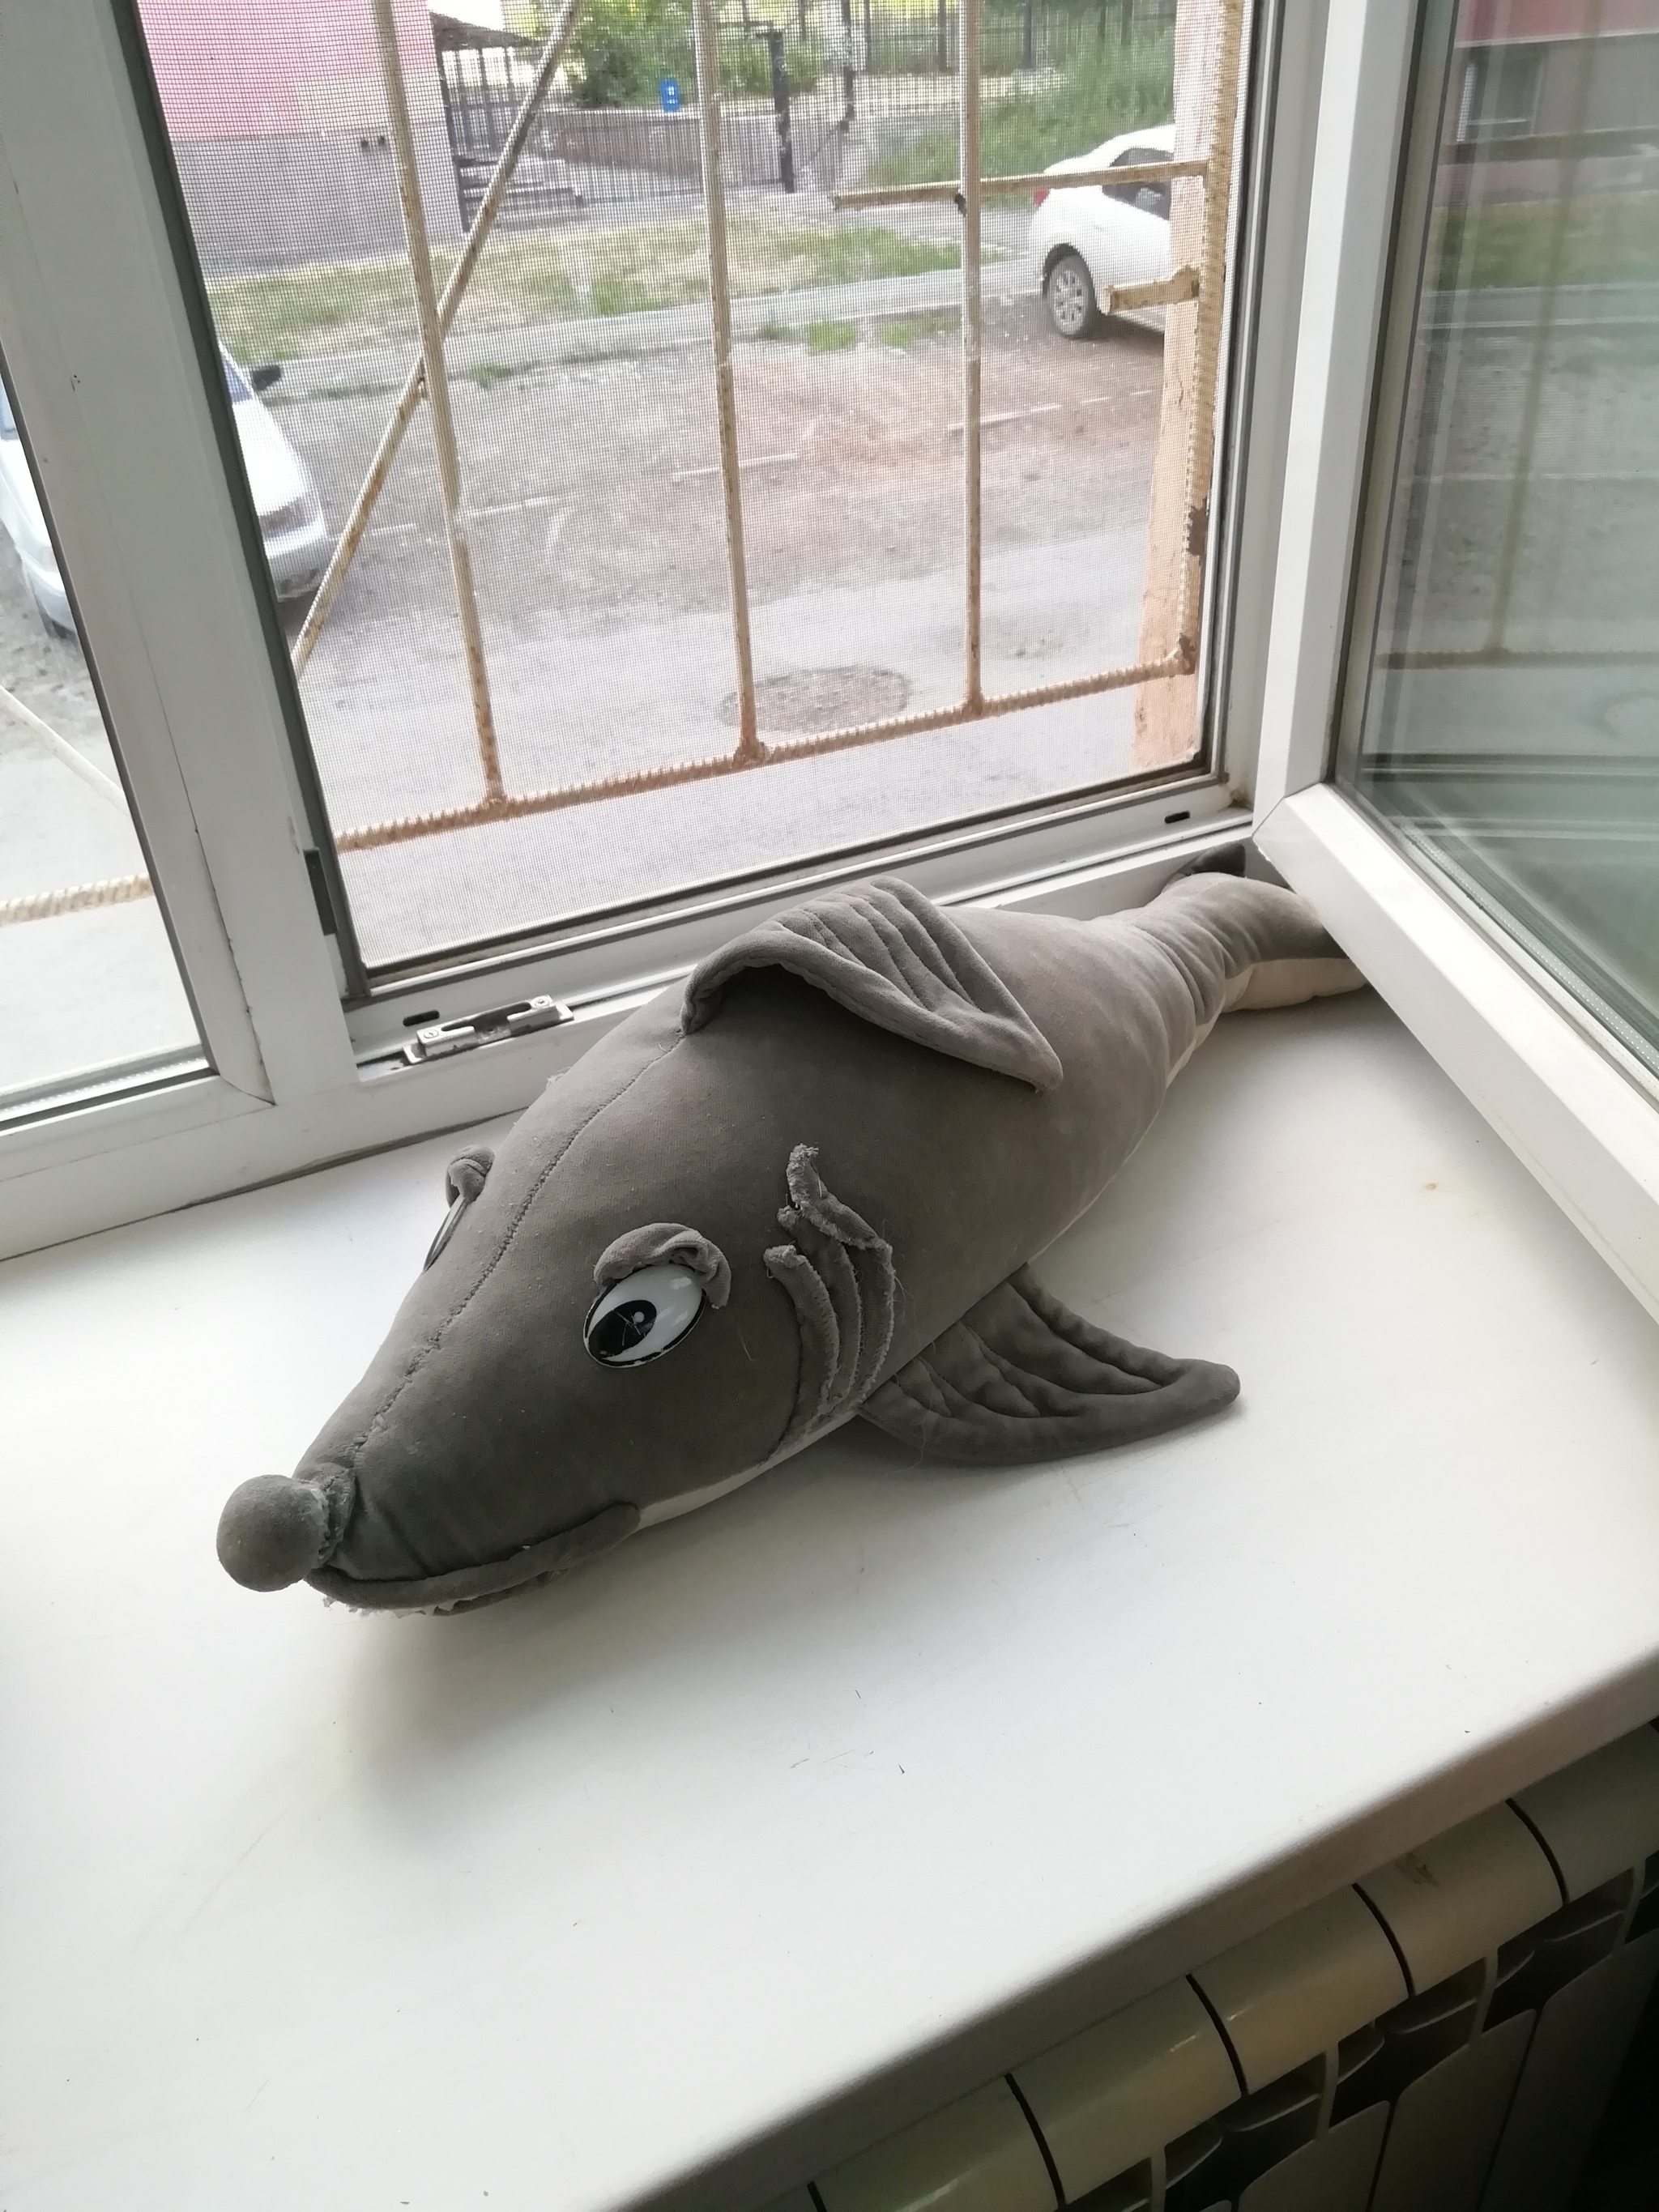 When you want an Ikea shark and your mom says, Why waste money? I'll make it just as good! - My, Mobile photography, Humor, IKEA, Shark, Blohey